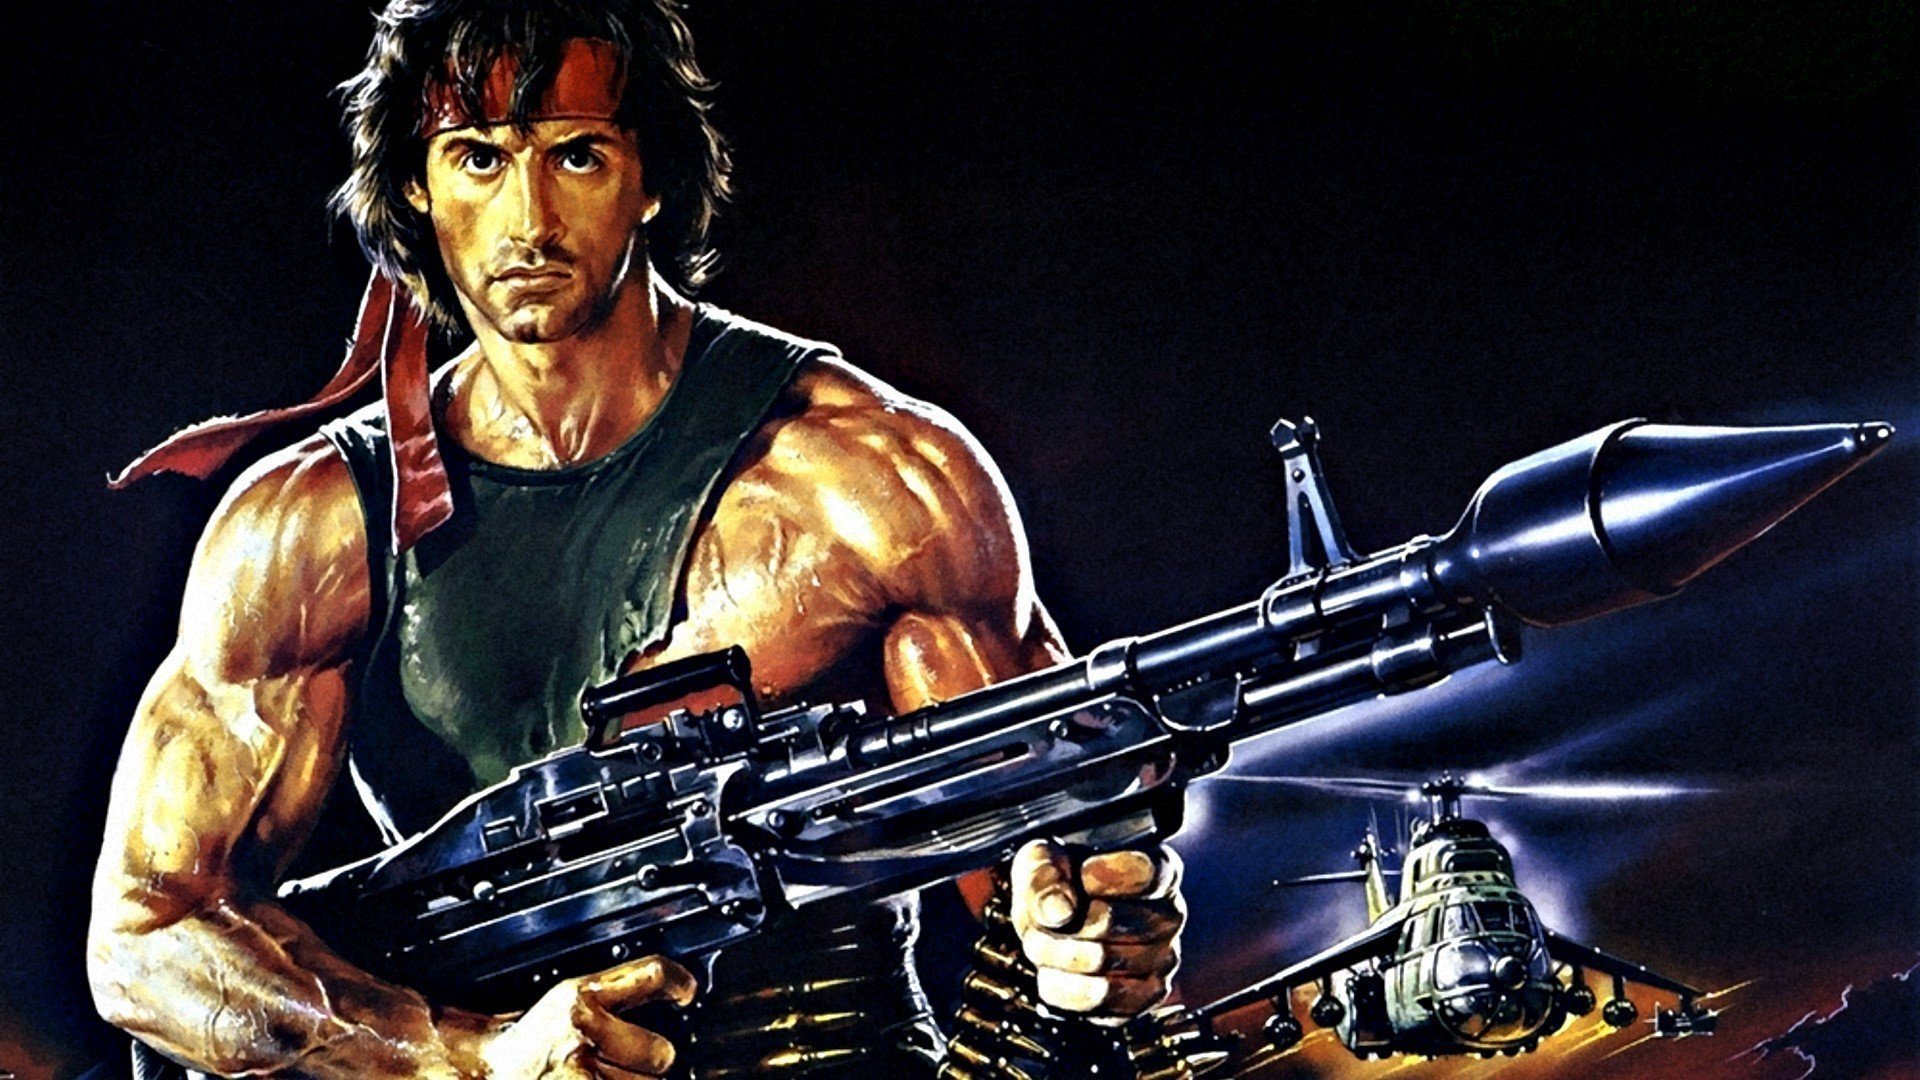 rambo wallpaper hd,movie,action film,poster,games,muscle